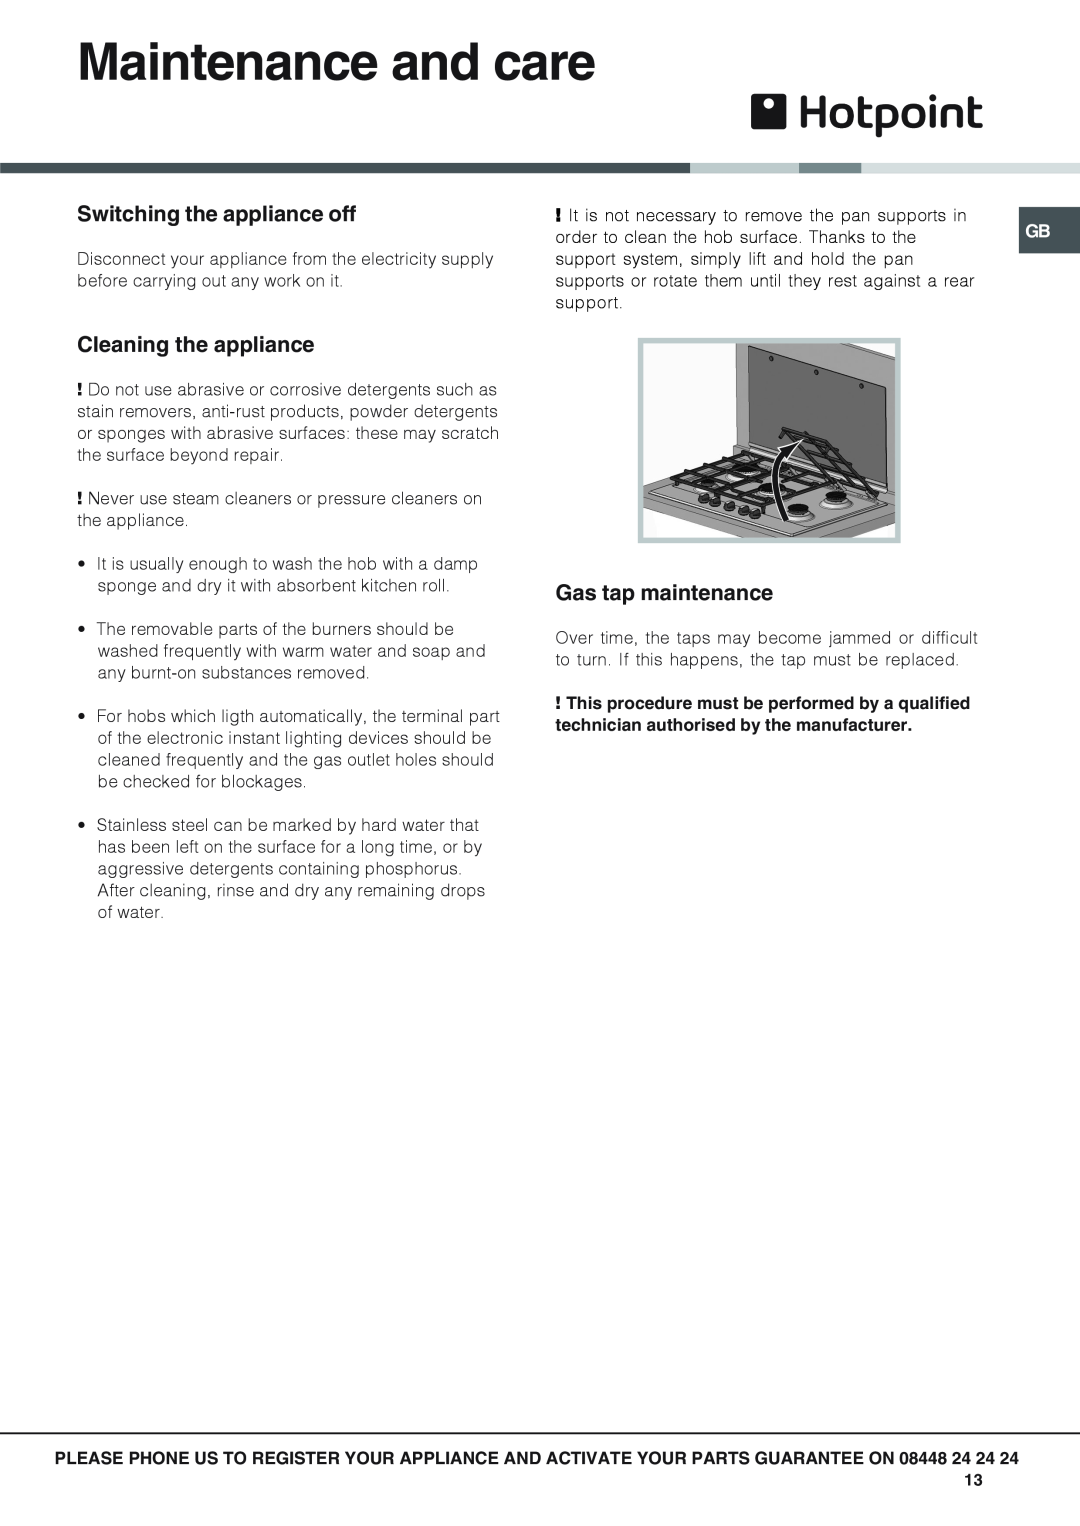 Hotpoint GA 630 RTX Maintenance and care, Switching the appliance off, Cleaning the appliance, Gas tap maintenance 